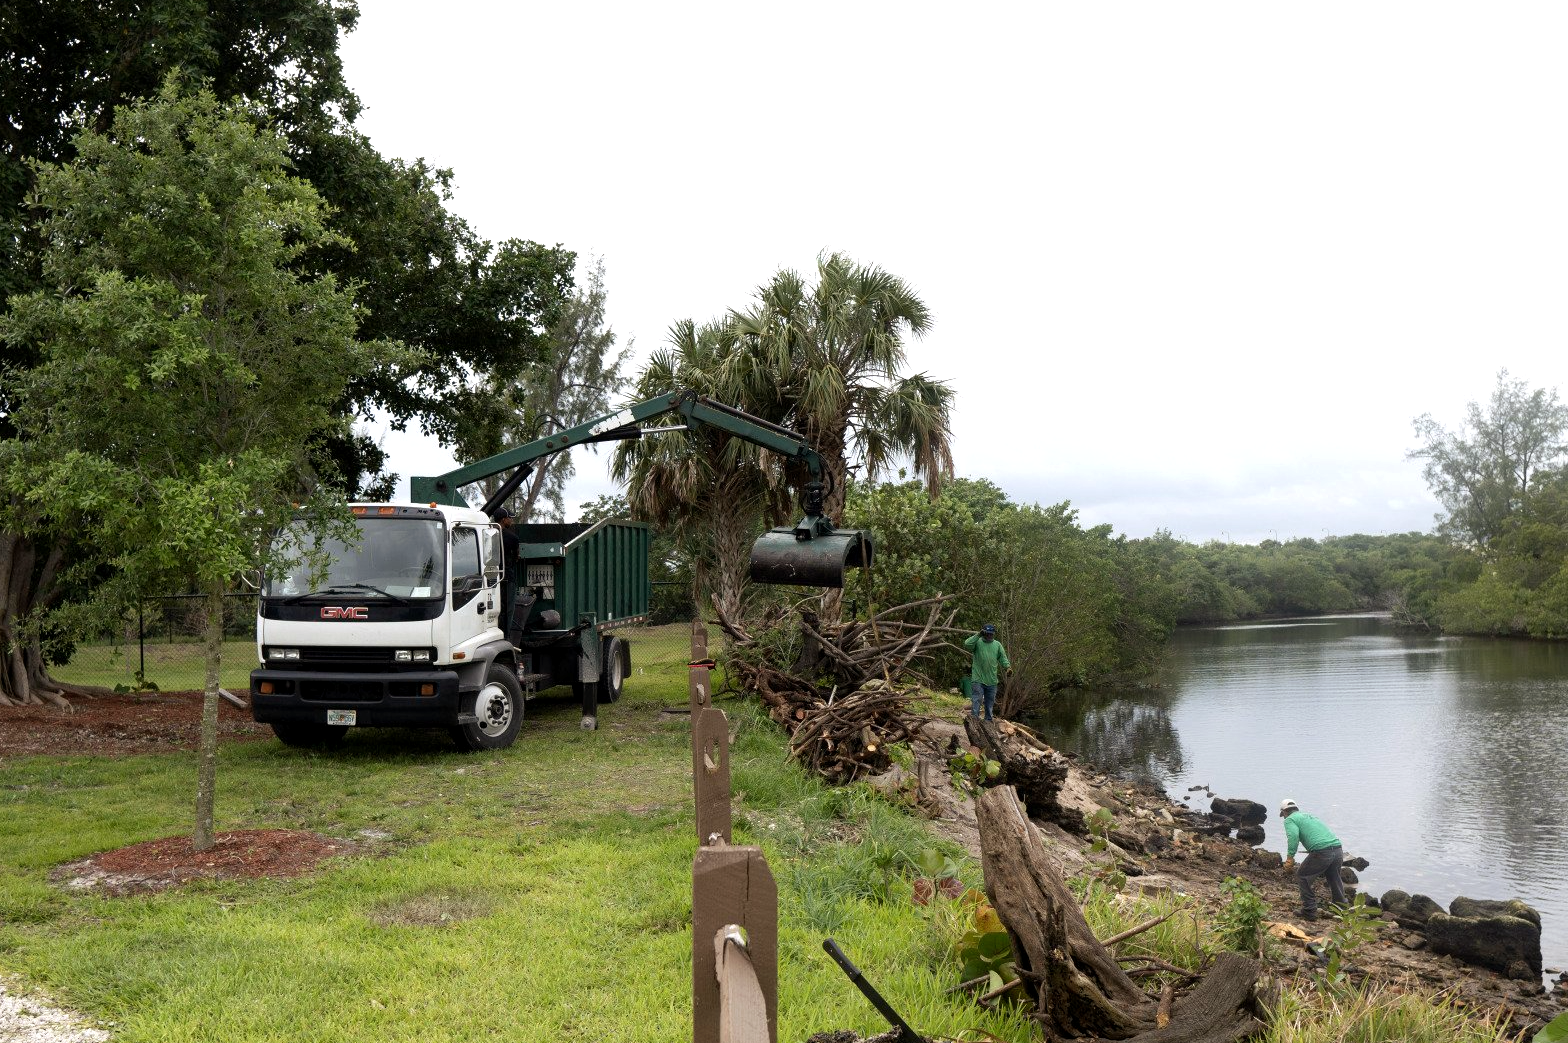 Land clearing service in South Florida performed on a park